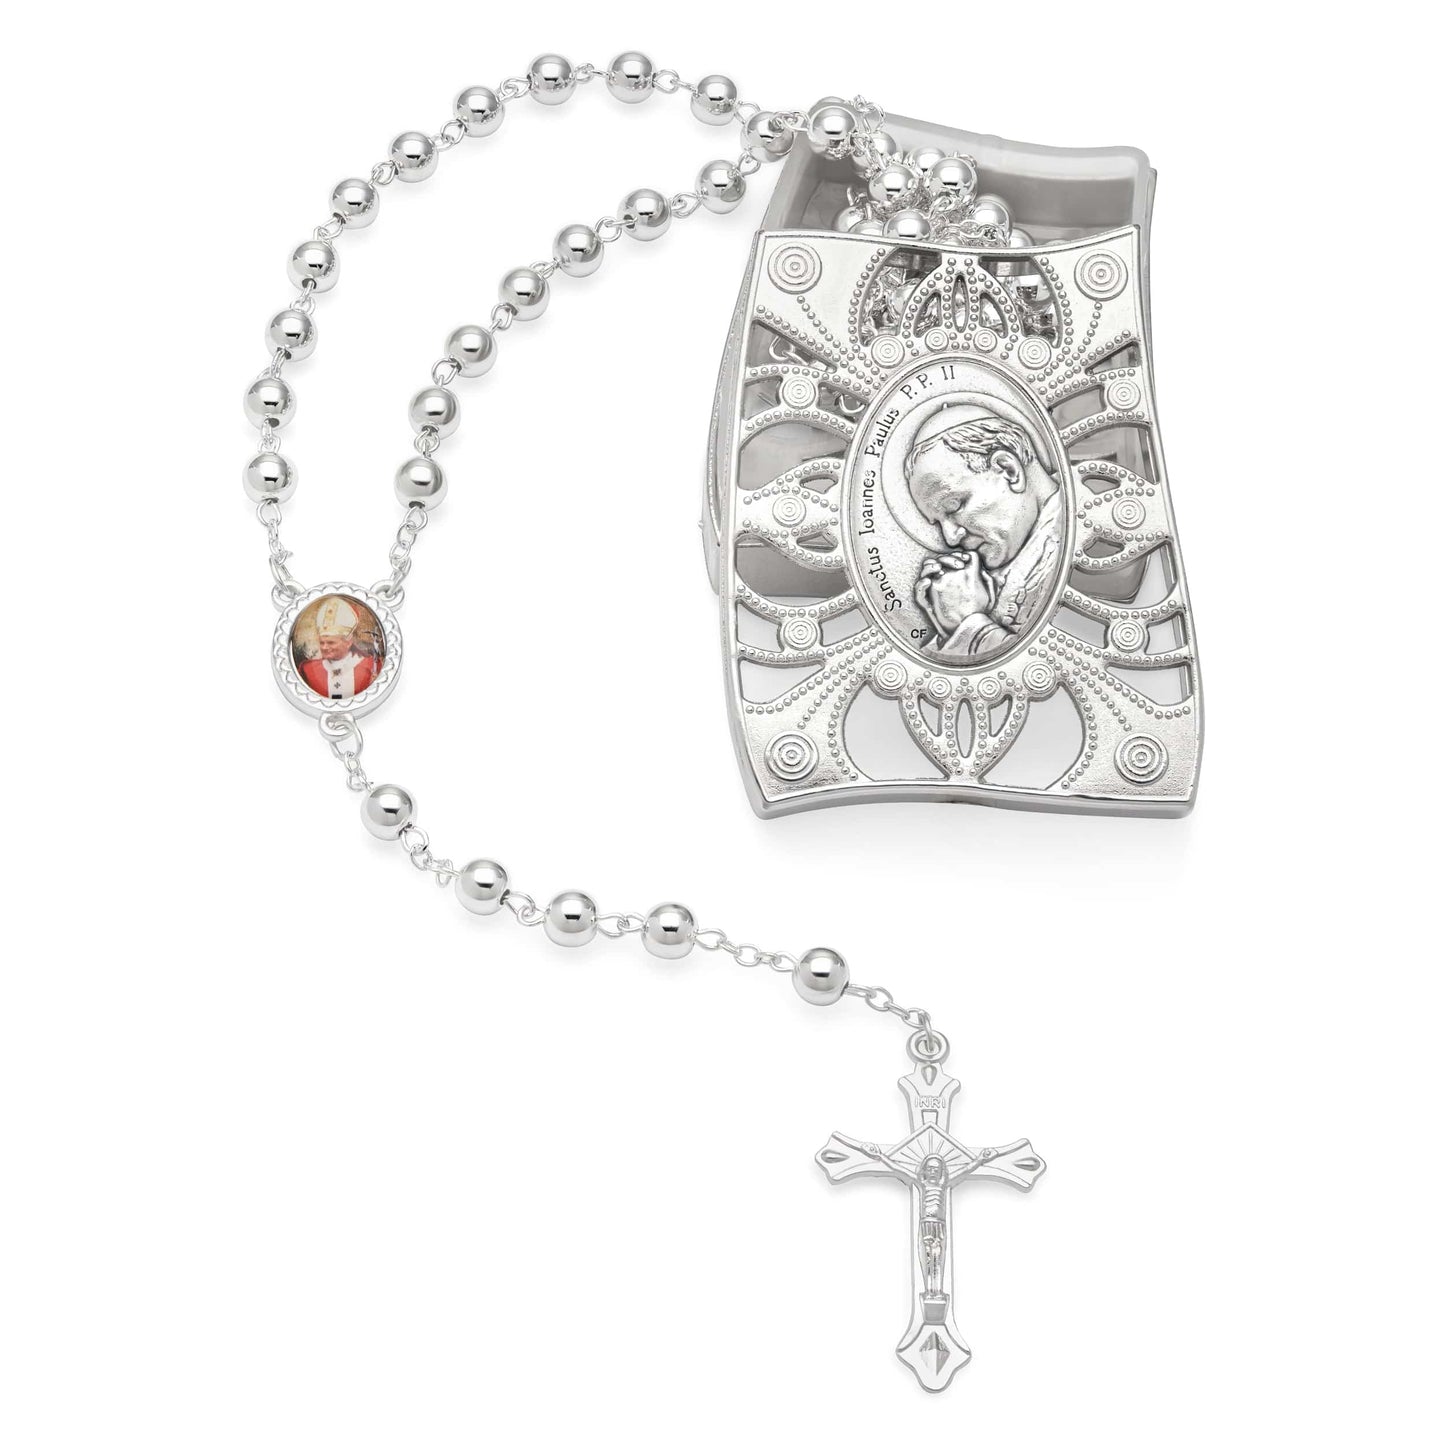 MONDO CATTOLICO Prayer Beads 48 cm (18.8 in) / 6 mm (0.23 in) Case and Rosary of Saint John Paul II